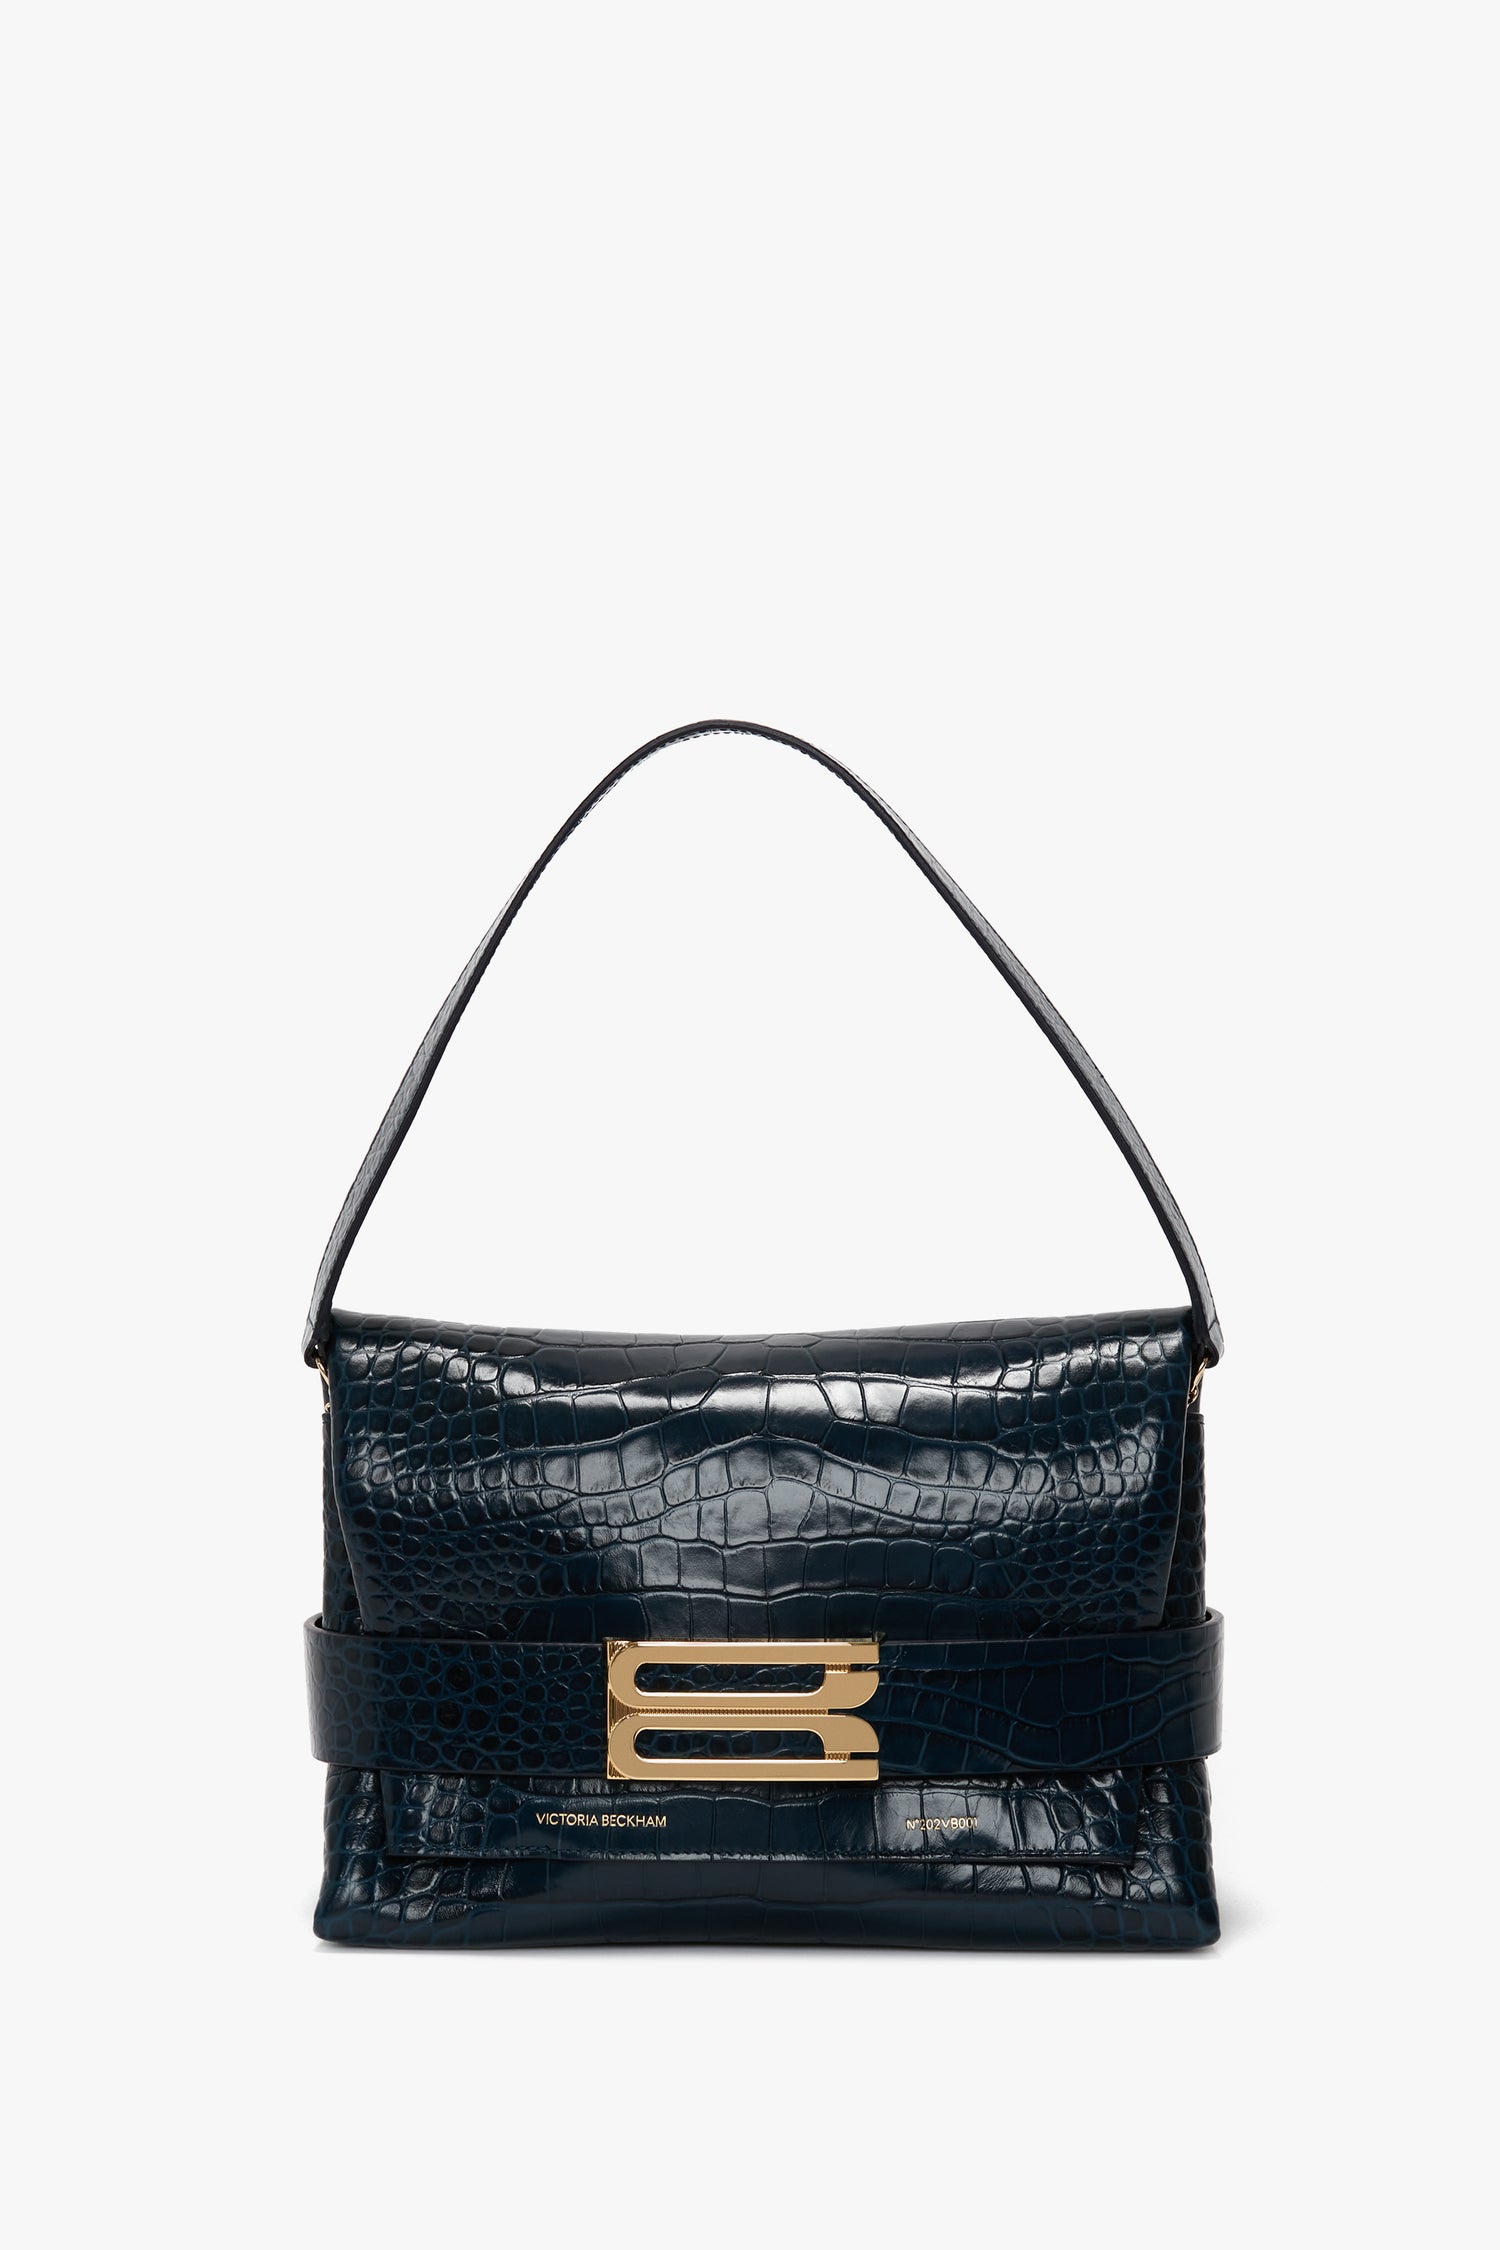 A chic B Pouch Bag In Croc Effect Midnight Blue Leather crafted from luxurious calf leather by Victoria Beckham, featuring an embossed crocodile print, a single strap, and a rectangular gold-tone buckle on the front.